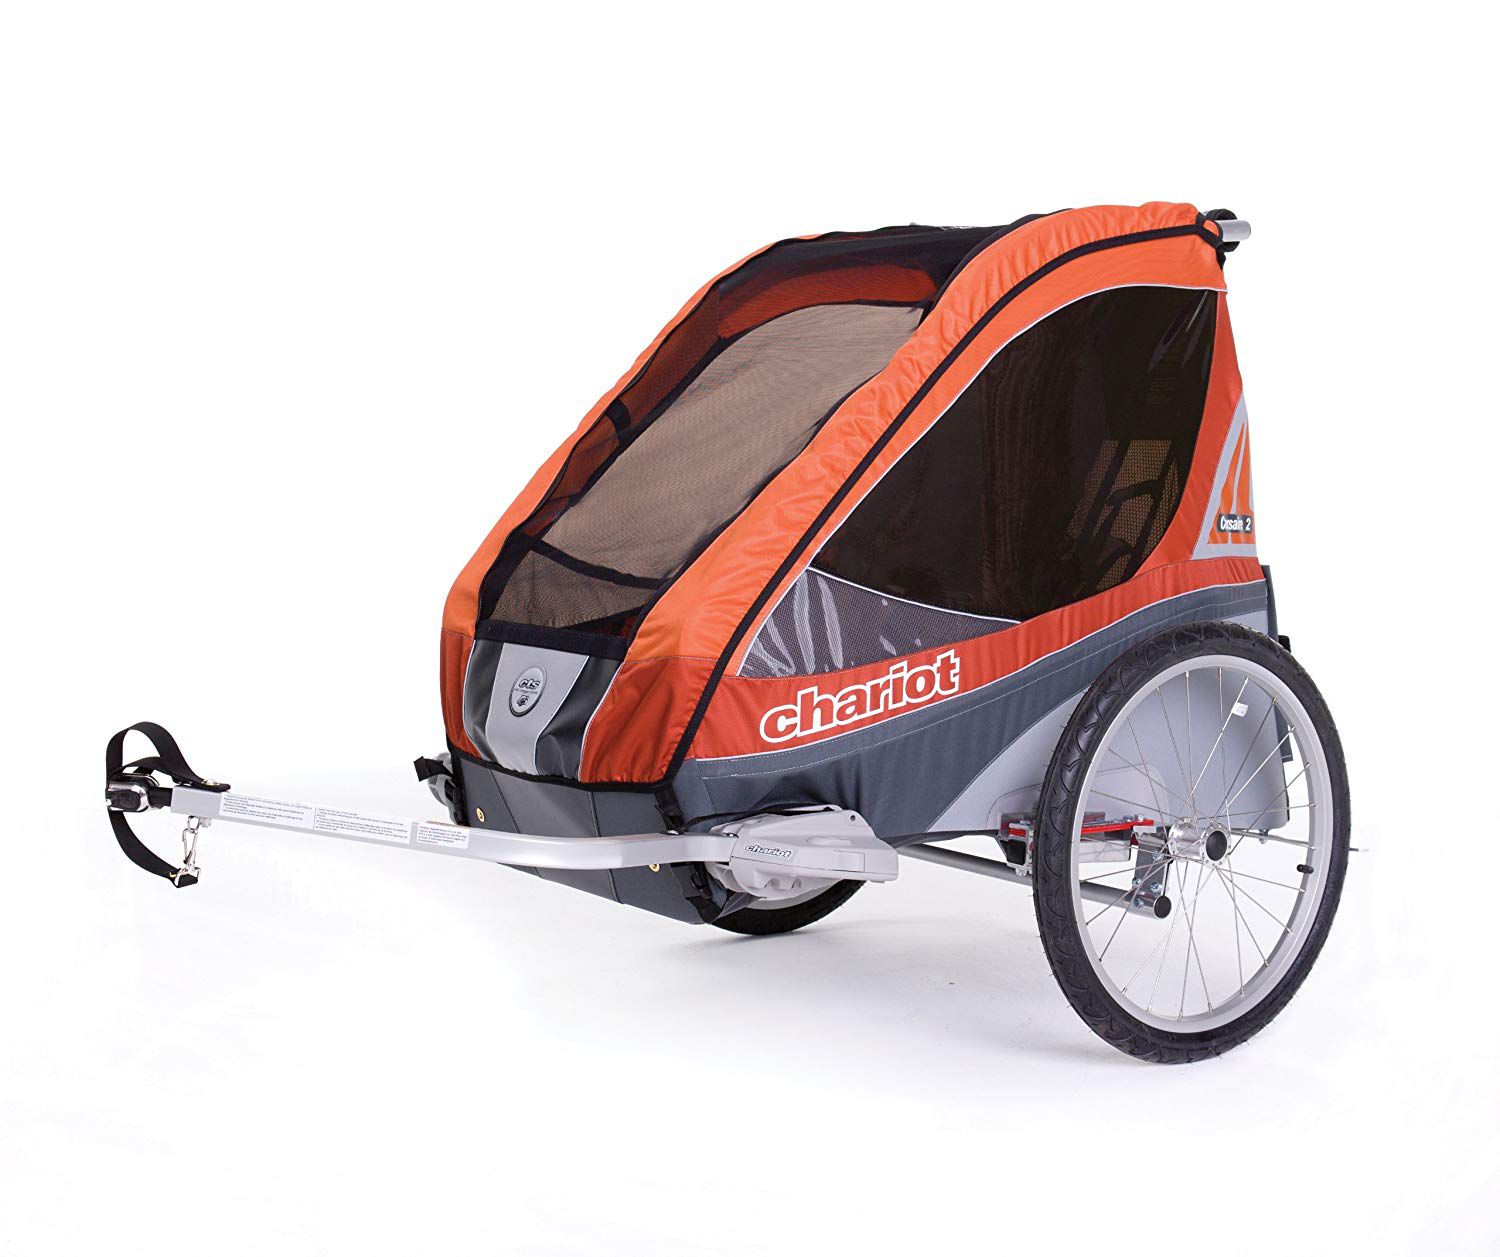 NEW Chariot Corsaire 1 Carrier Apricot Red Grey Multi Sport Bike Bicycle Trailer